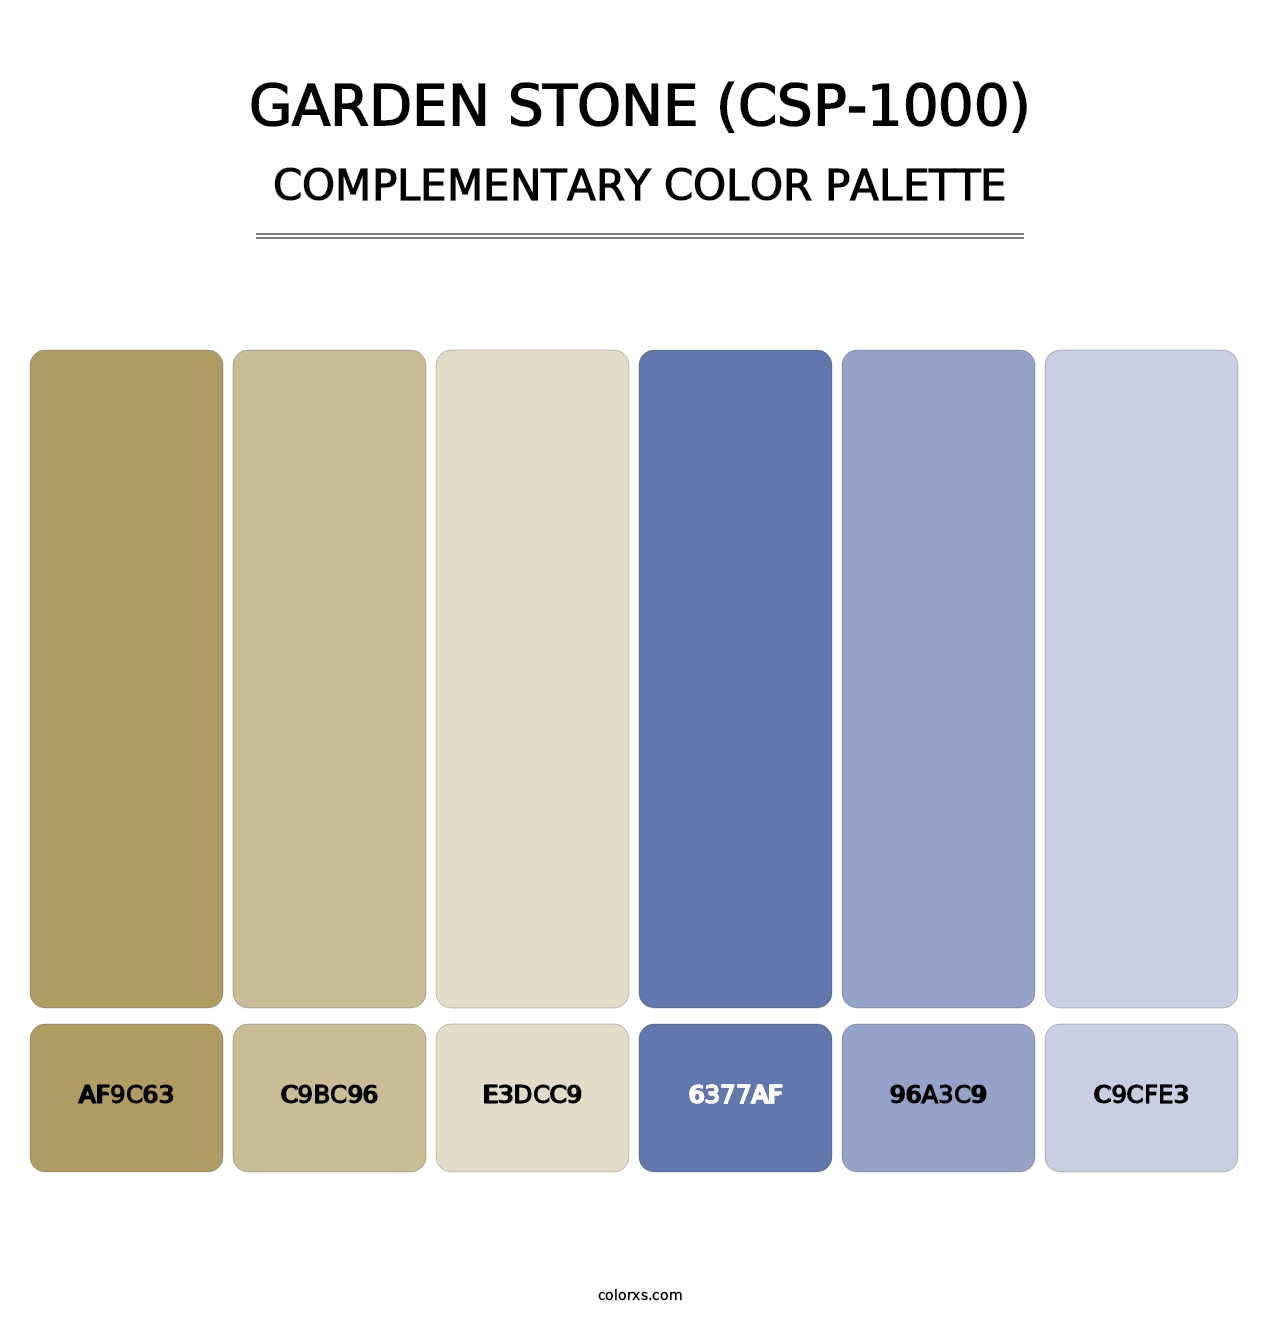 Garden Stone (CSP-1000) - Complementary Color Palette